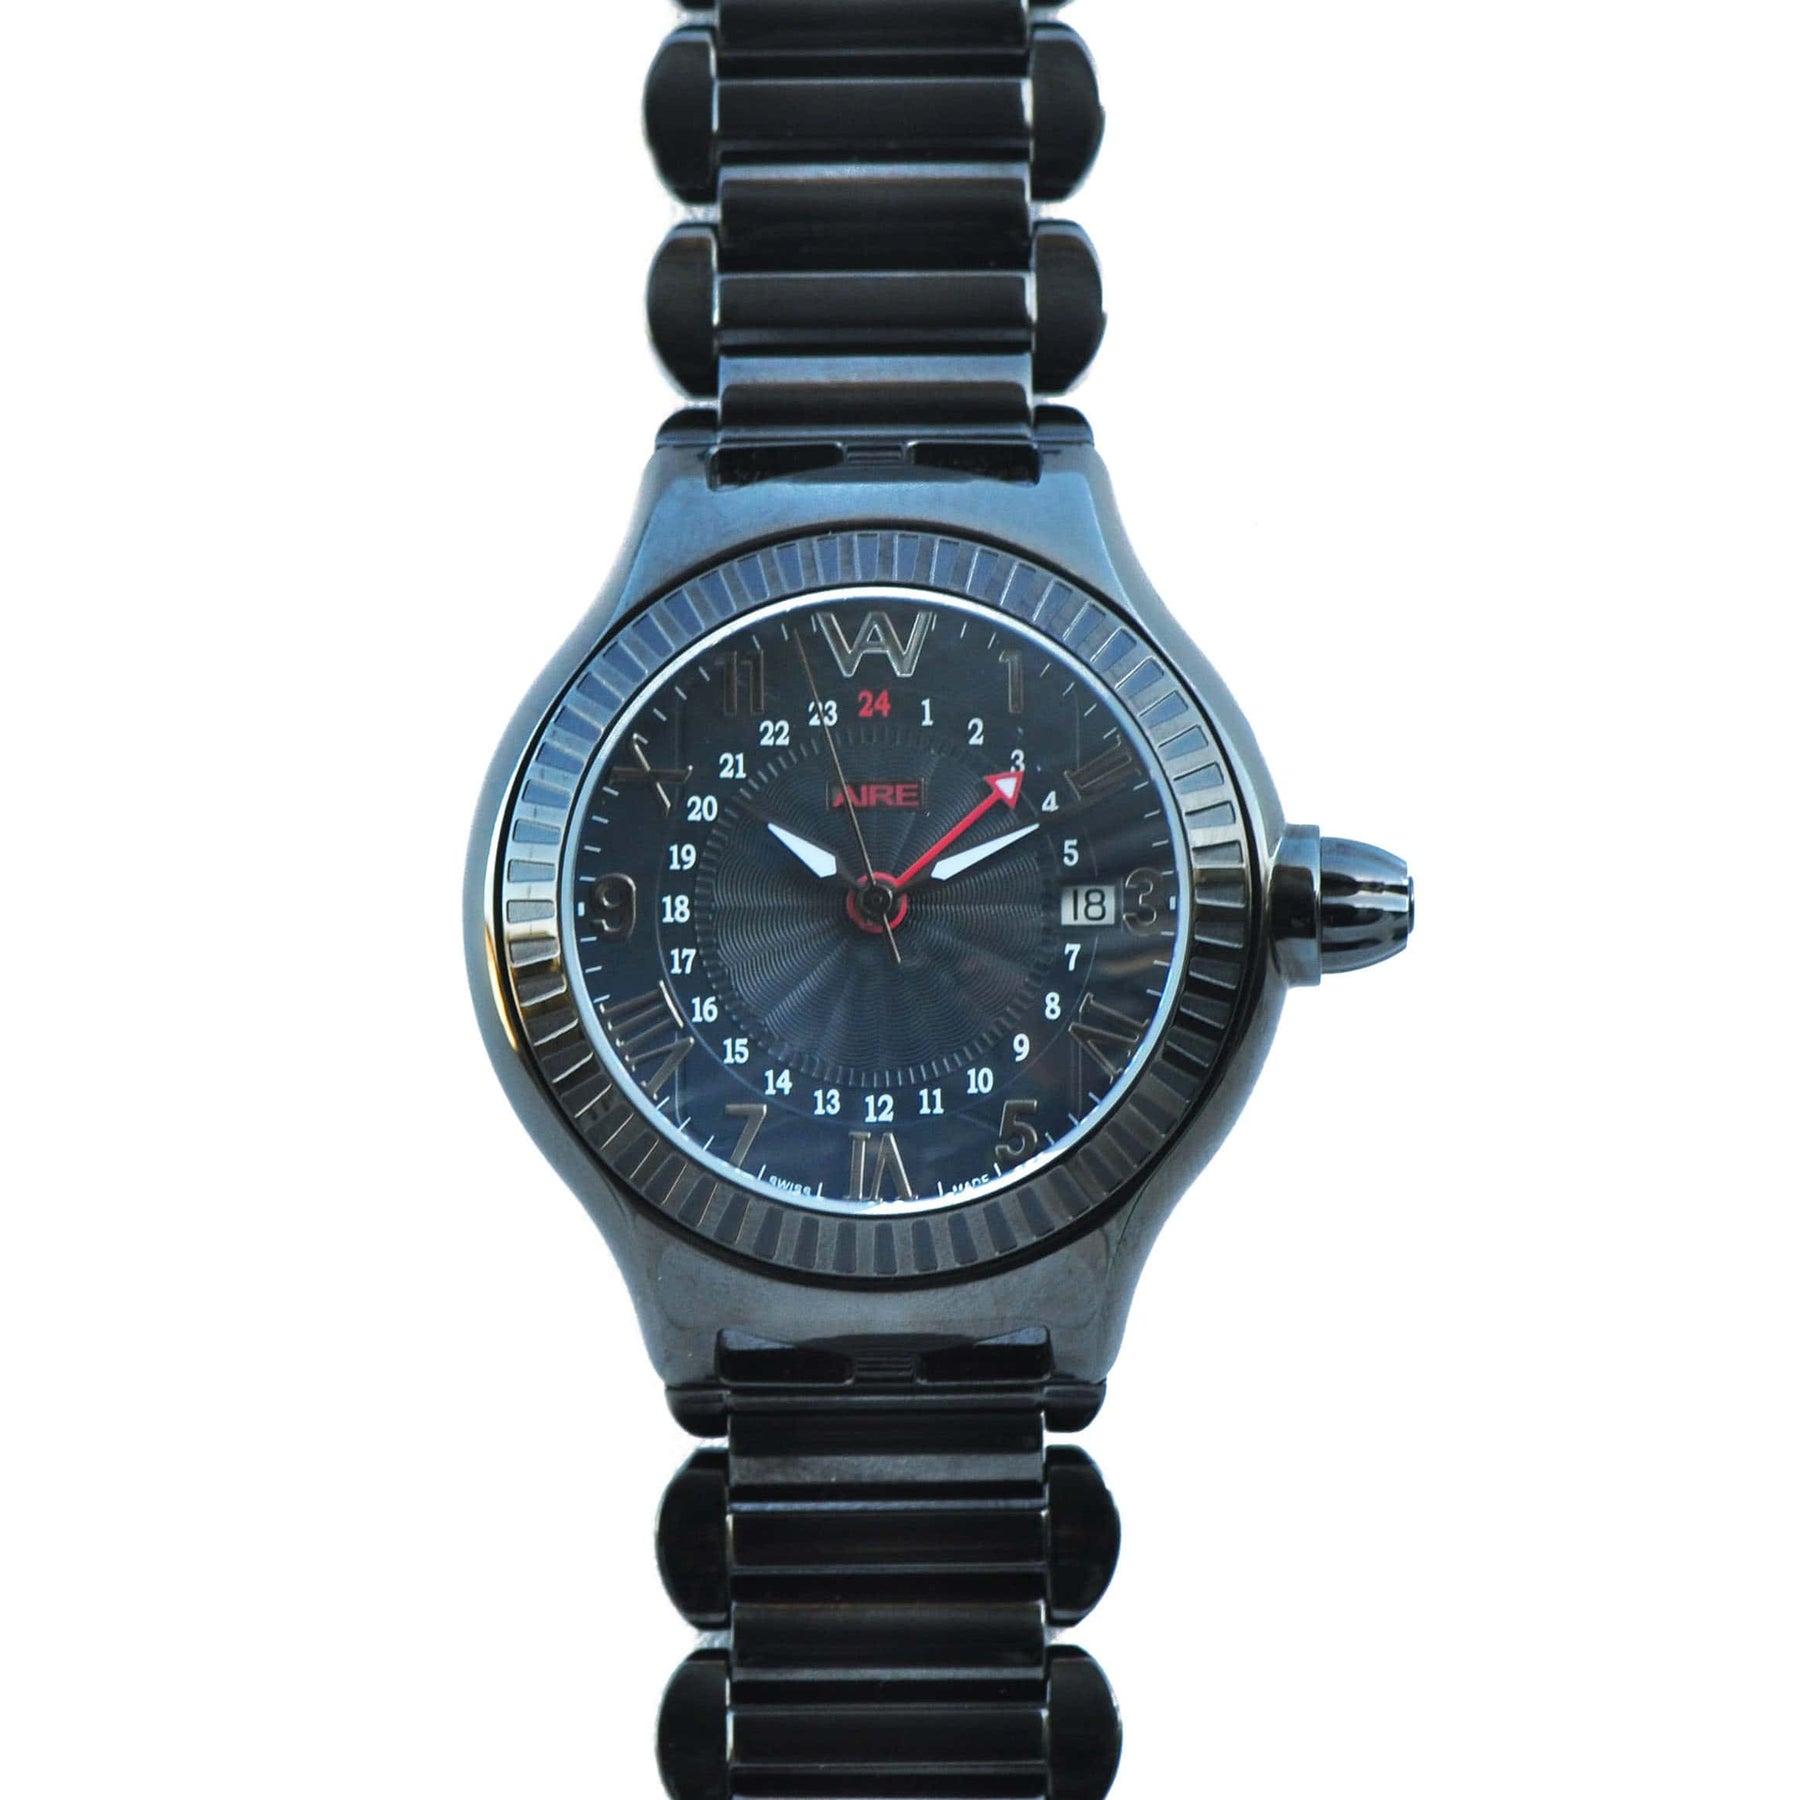 CHRIS AIRE WATCH - PARLAY GMT BLACK - Chris Aire Fine Jewelry & Timepieces